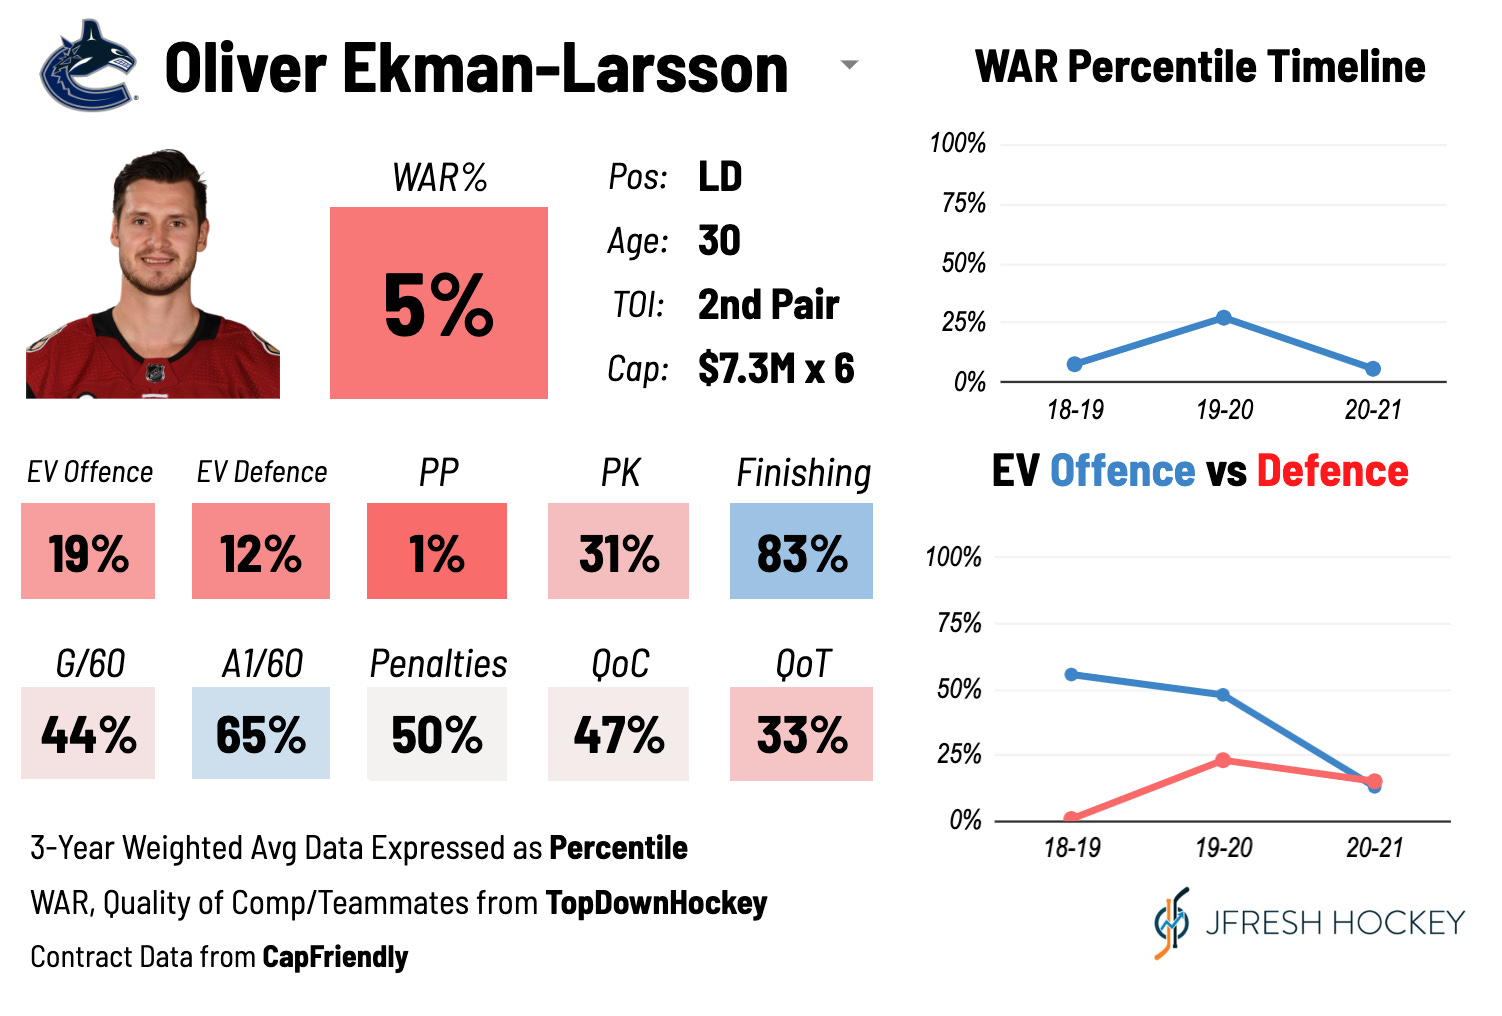 Arizona Coyotes D Oliver Ekman-Larsson: Career-High Points in 2015-16